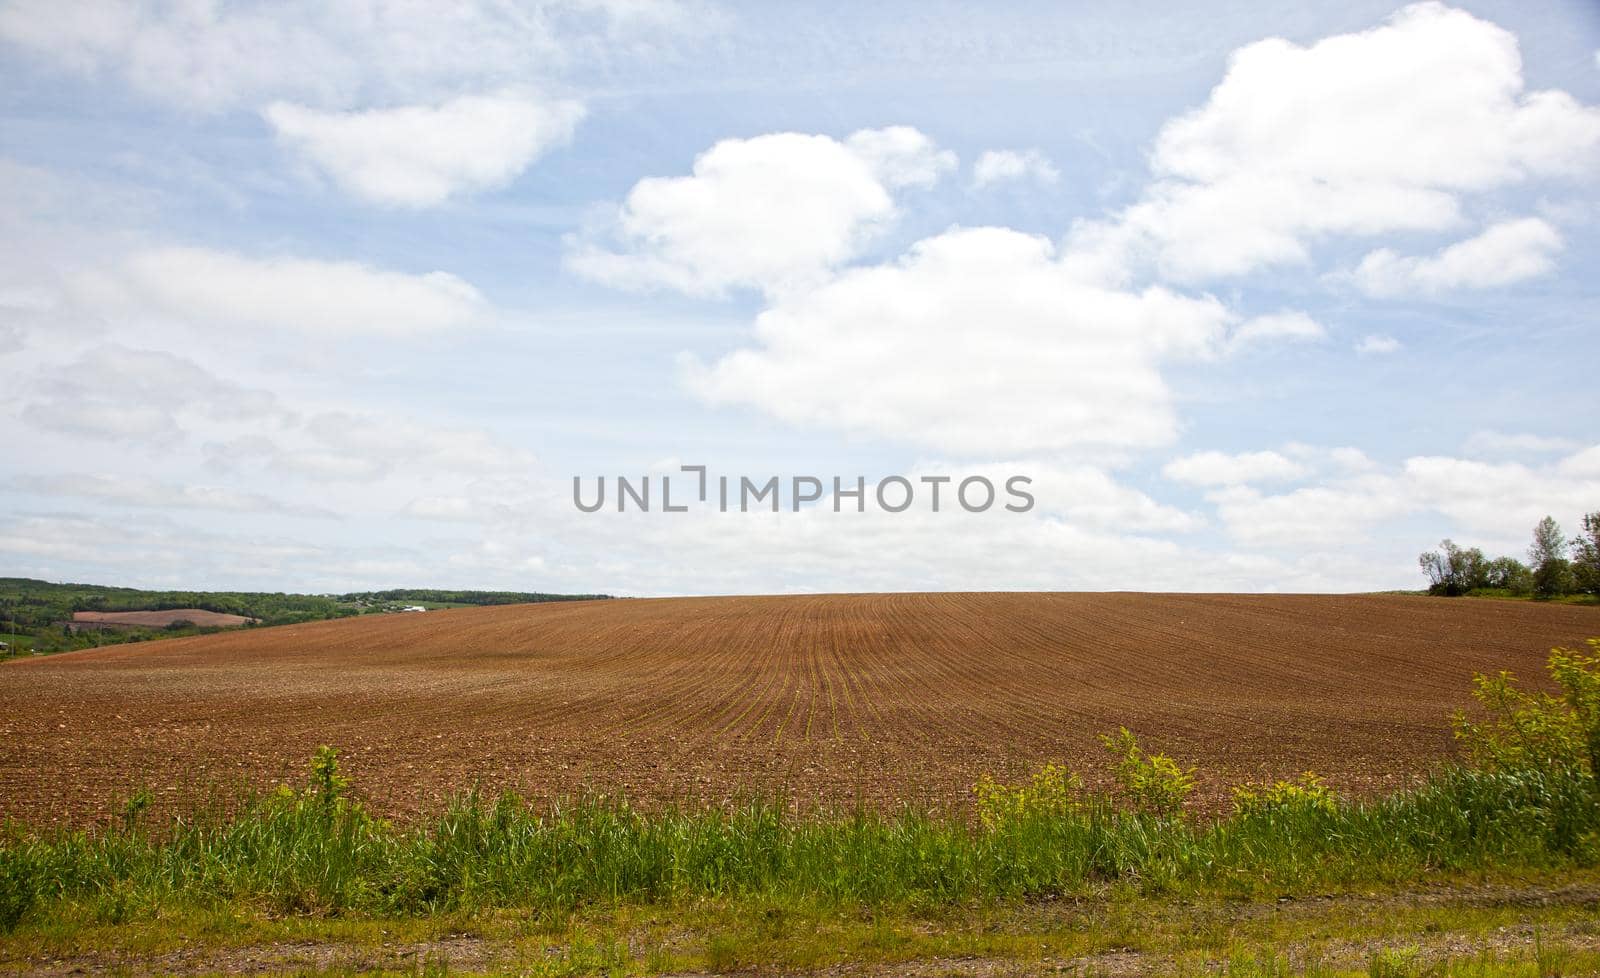 Long brown dirt field with rows of planted crop against a blue sky and clouds 